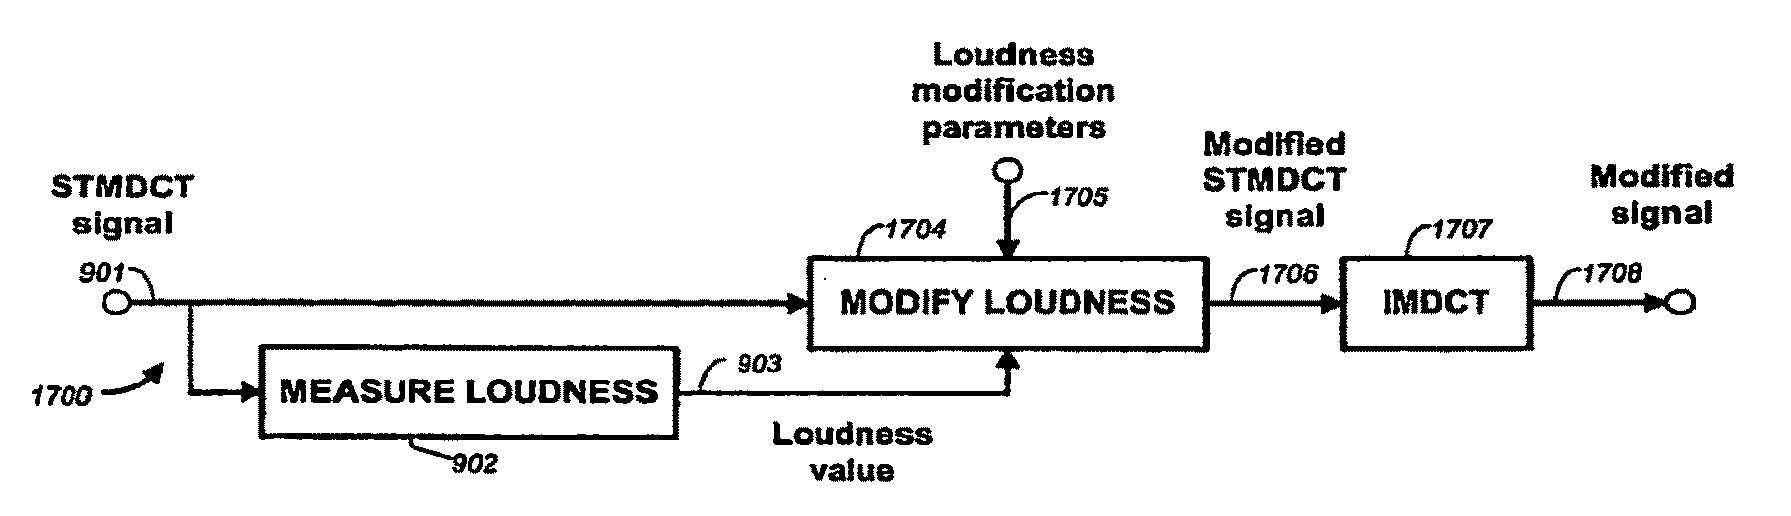 Audio Signal Loudness Measurement and Modification in the MDCT Domain